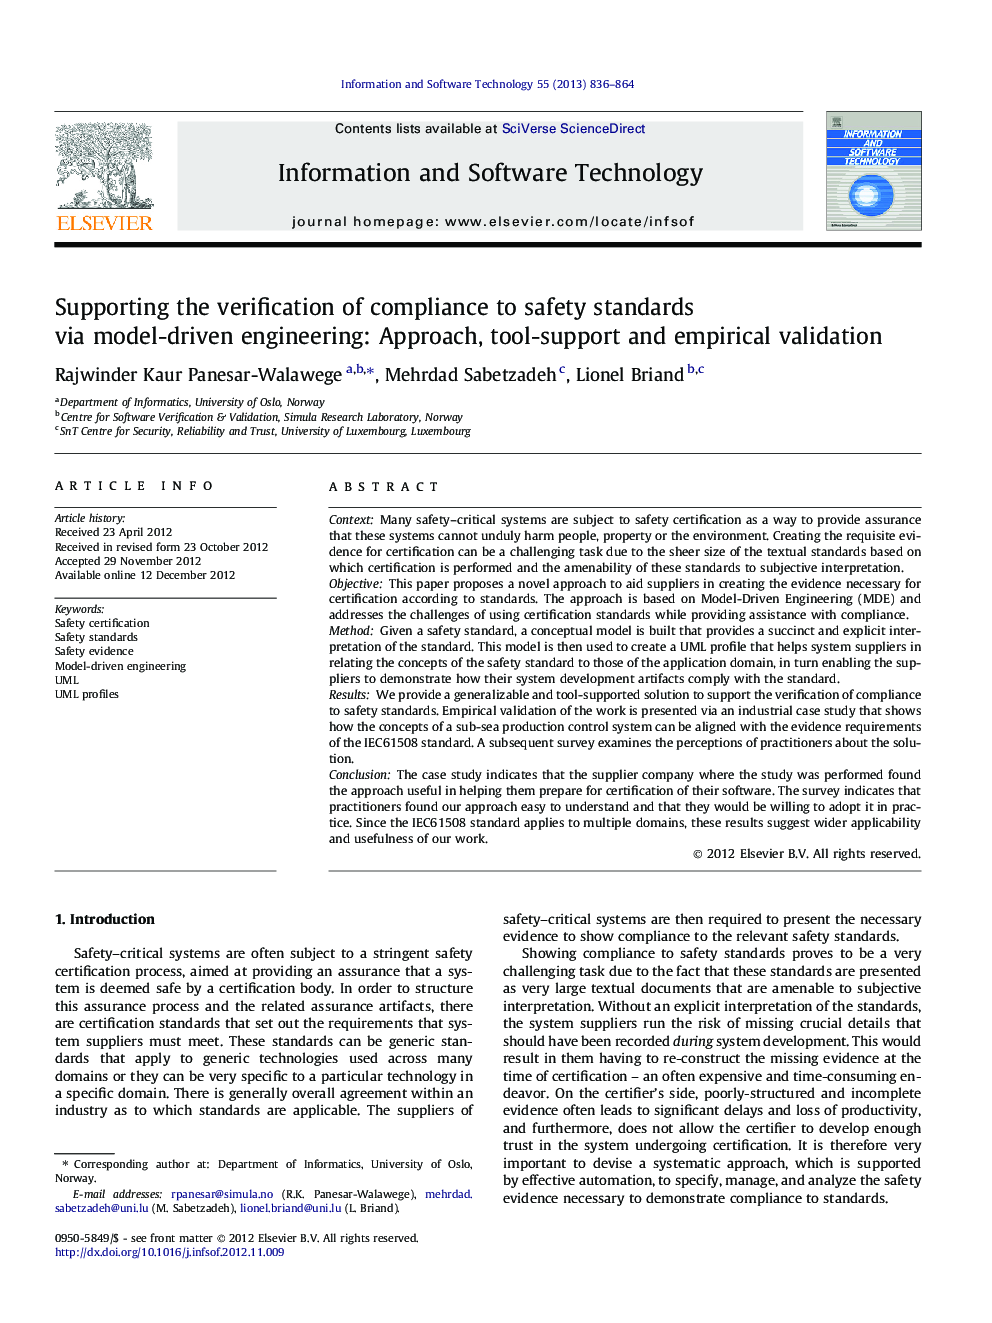 Supporting the verification of compliance to safety standards via model-driven engineering: Approach, tool-support and empirical validation